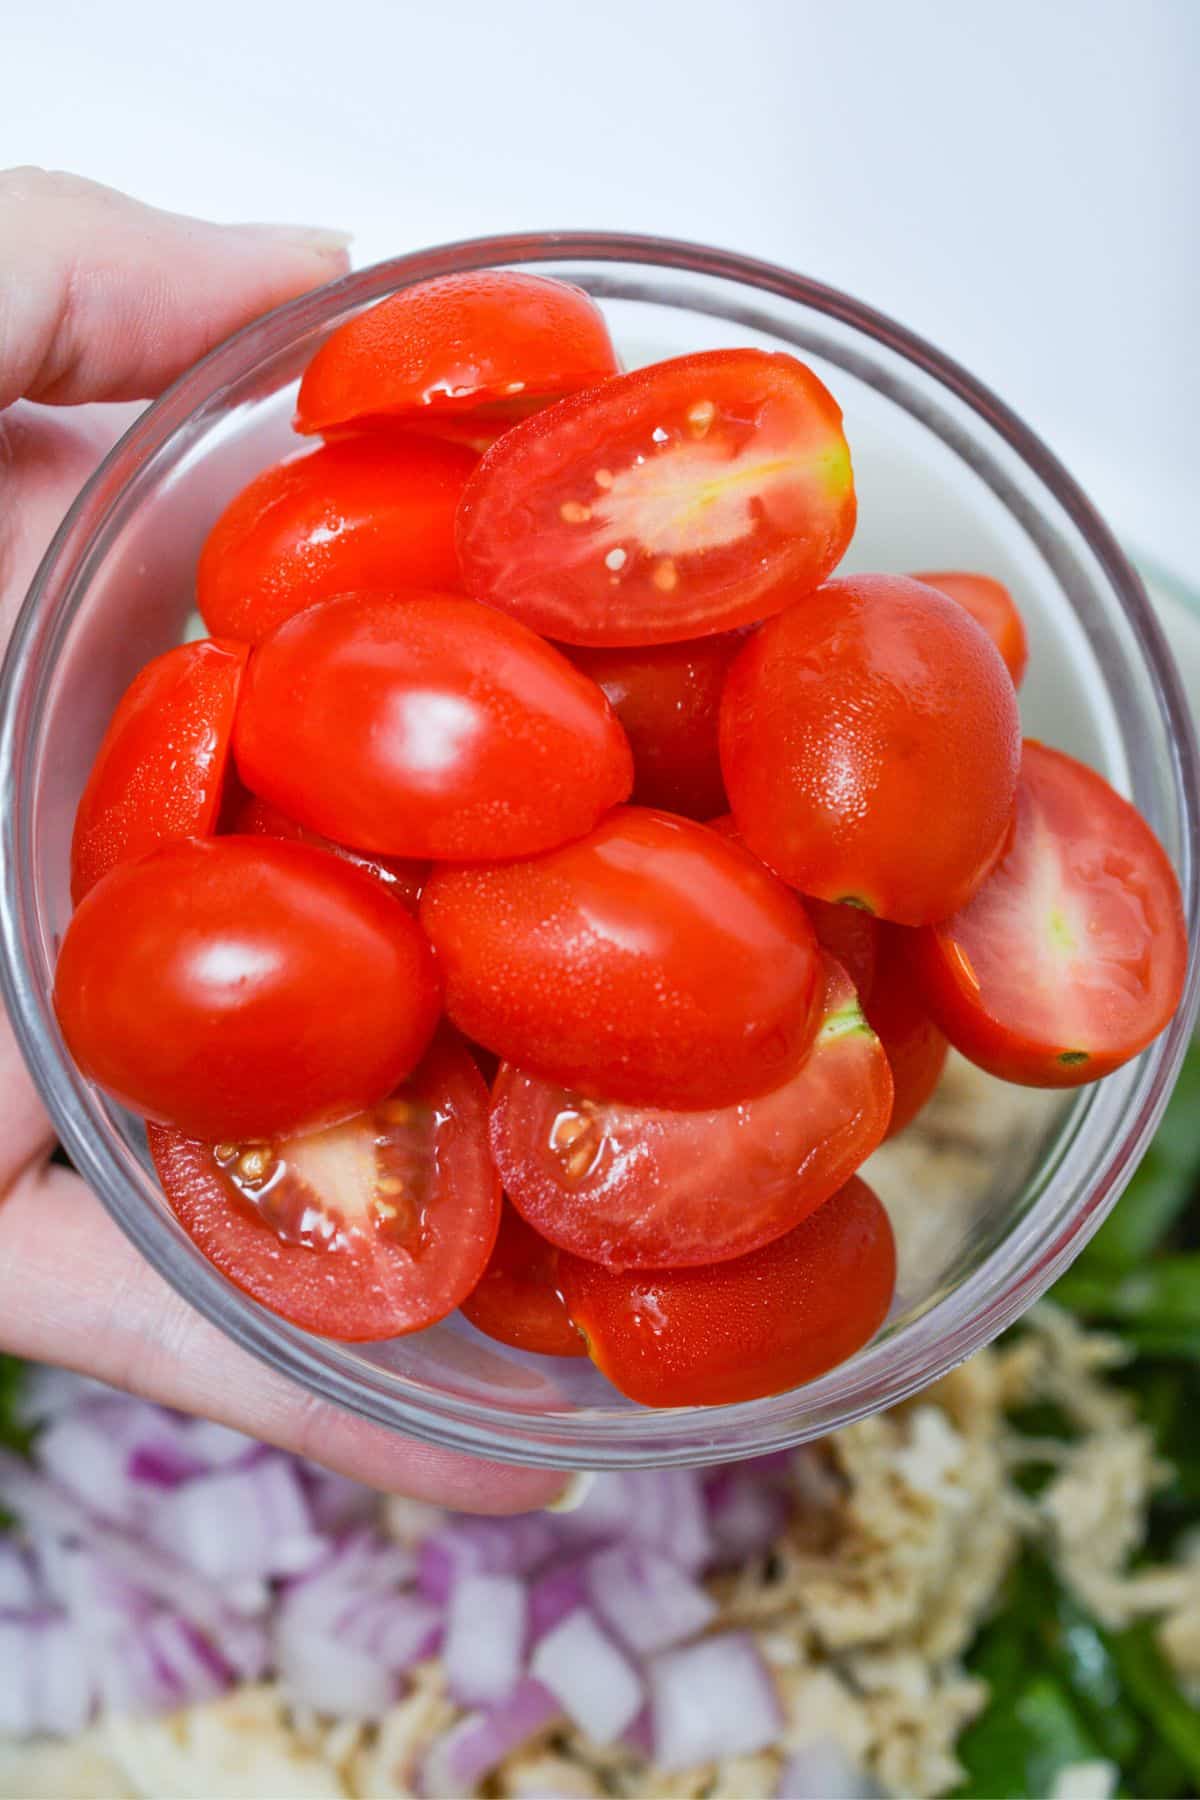 tomatoes going into salad